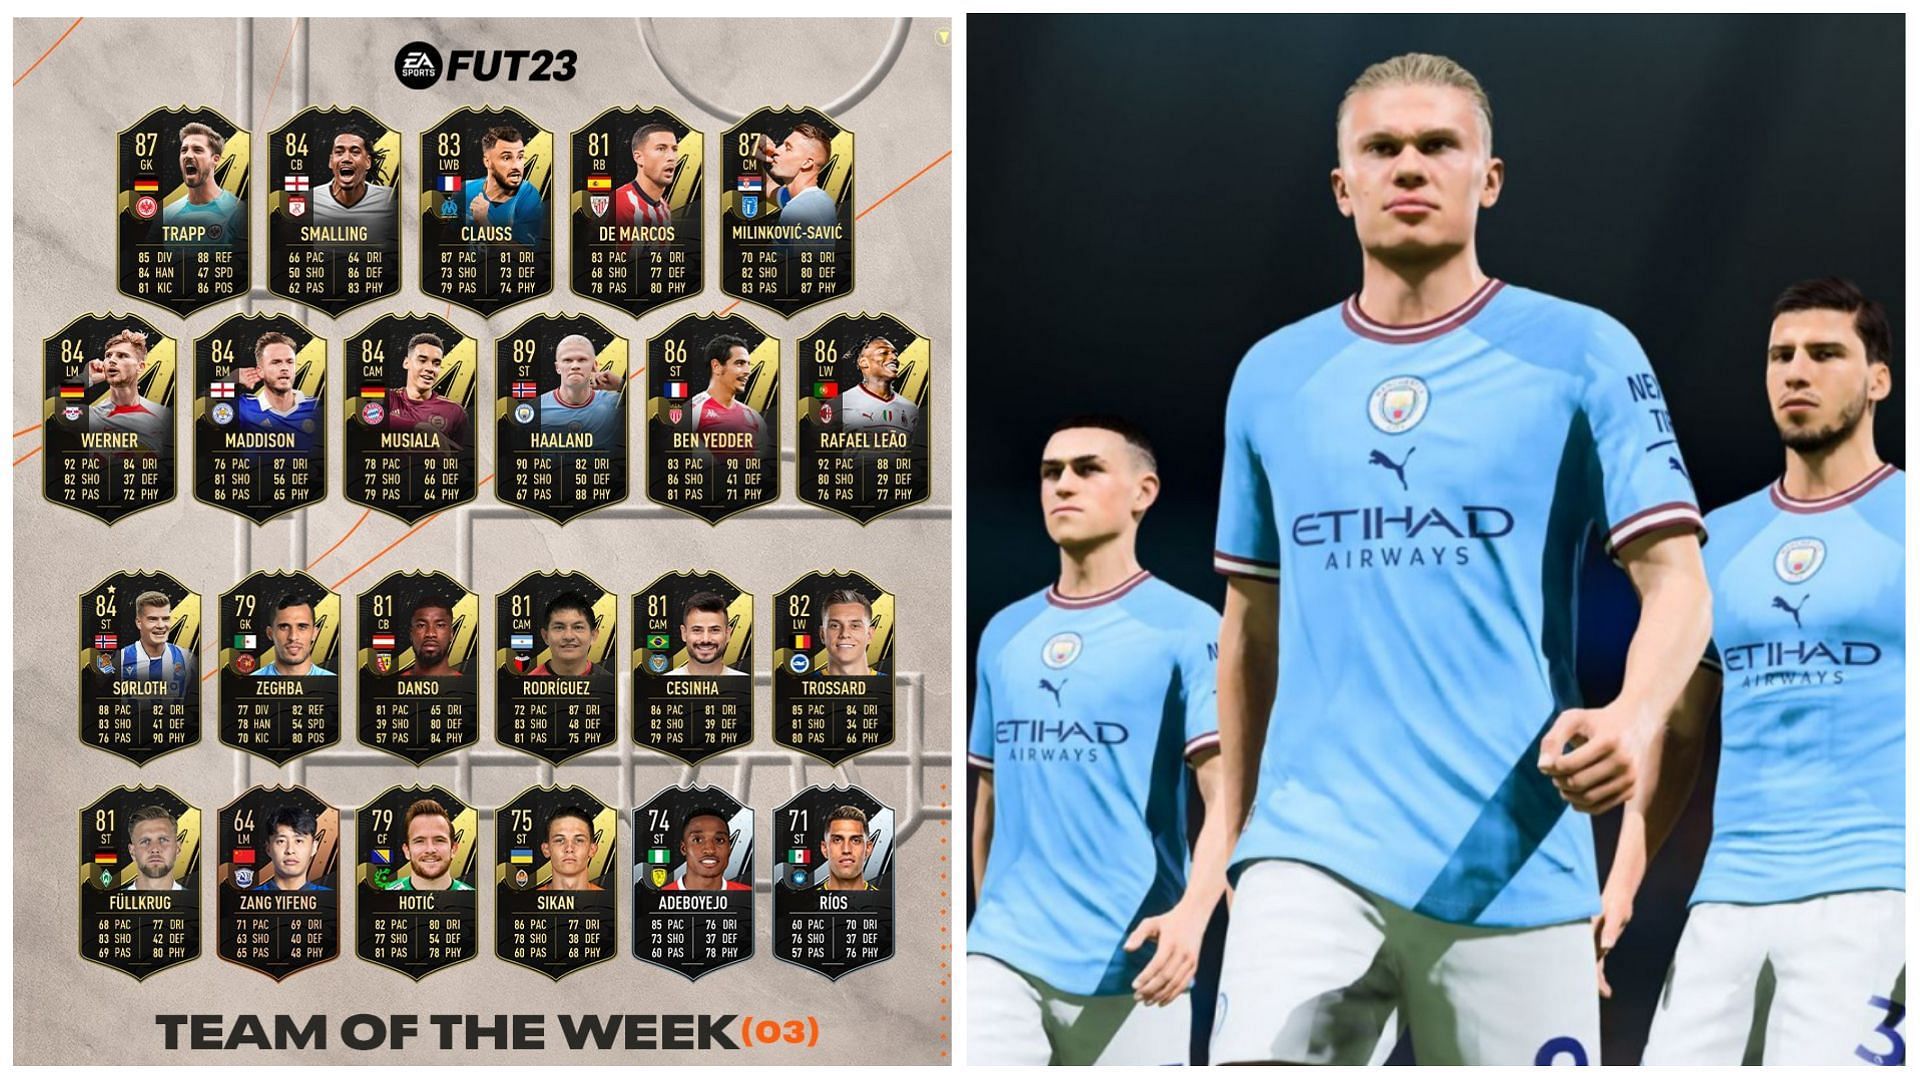 TOTW 3 features some incredible names in FIFA 23 (Images via EA Sports)